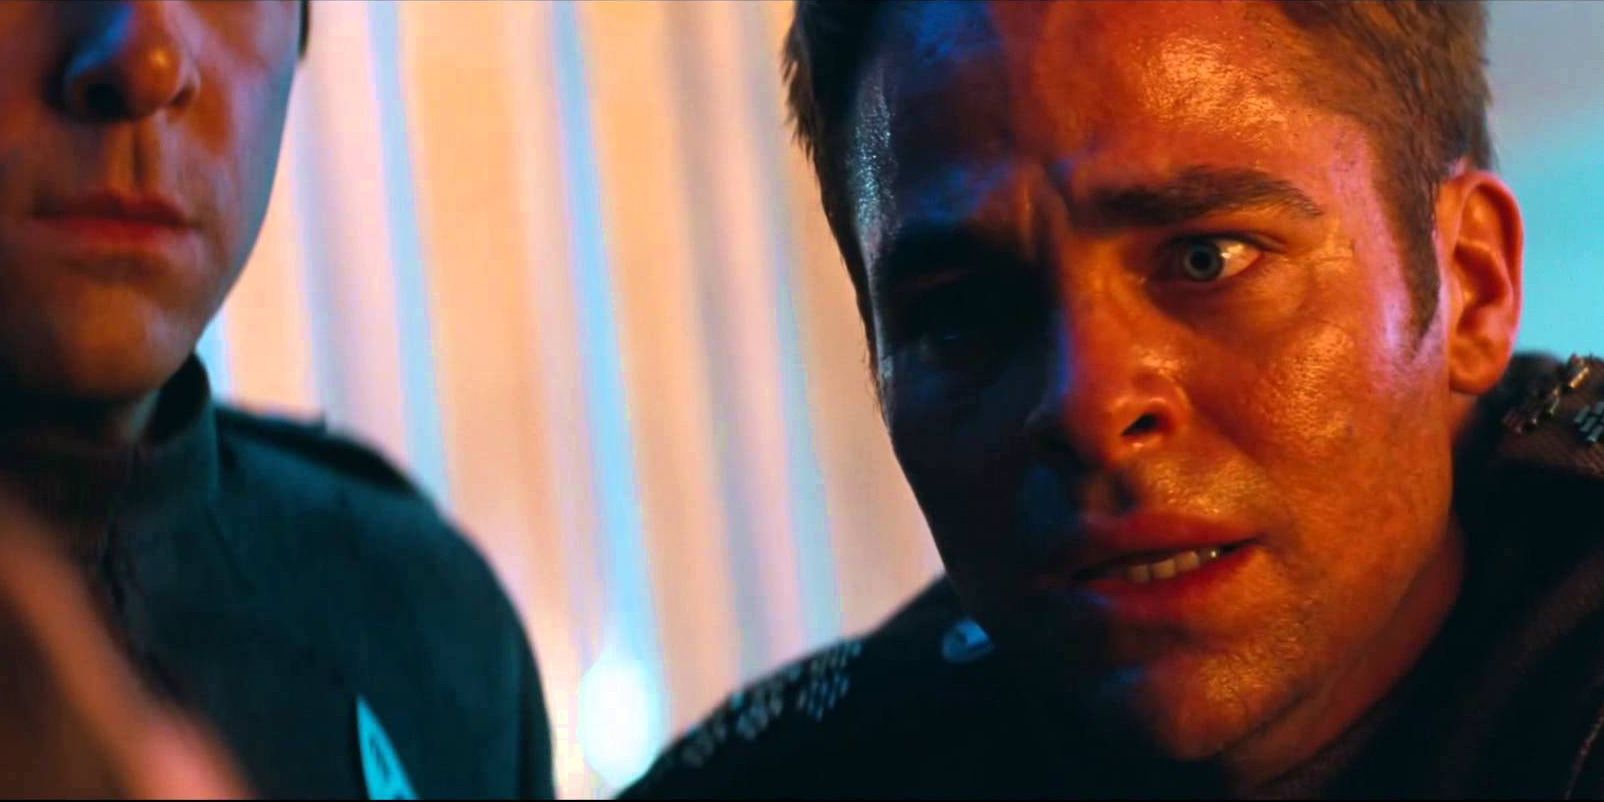 Kirk faces PIke's death in Star Trek Into Darkness